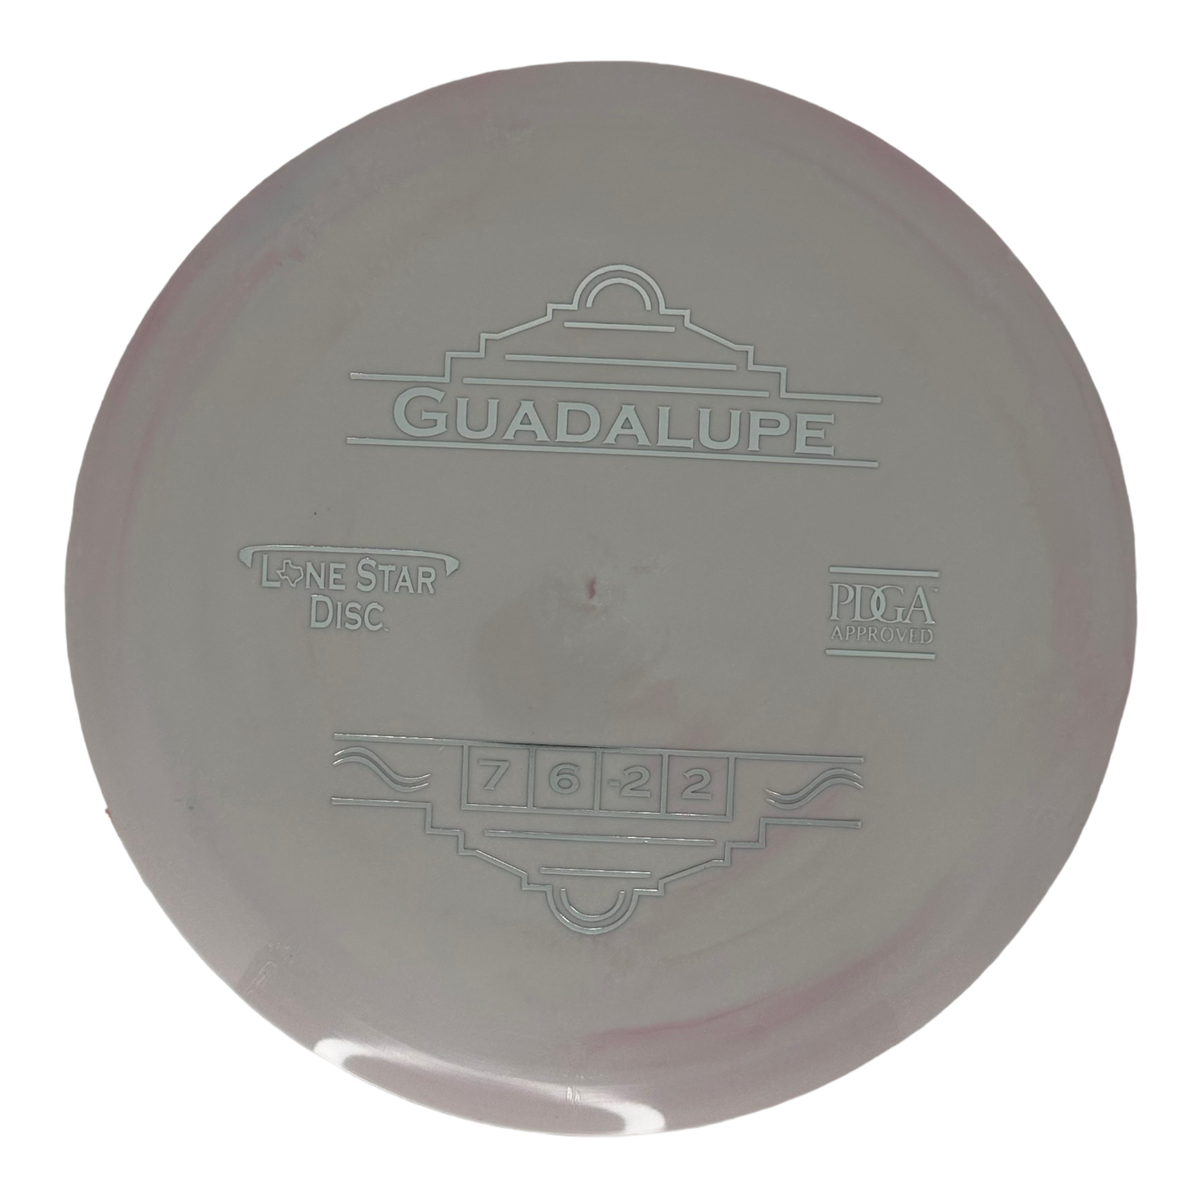 Lone Star Disc Lima Guadalupe